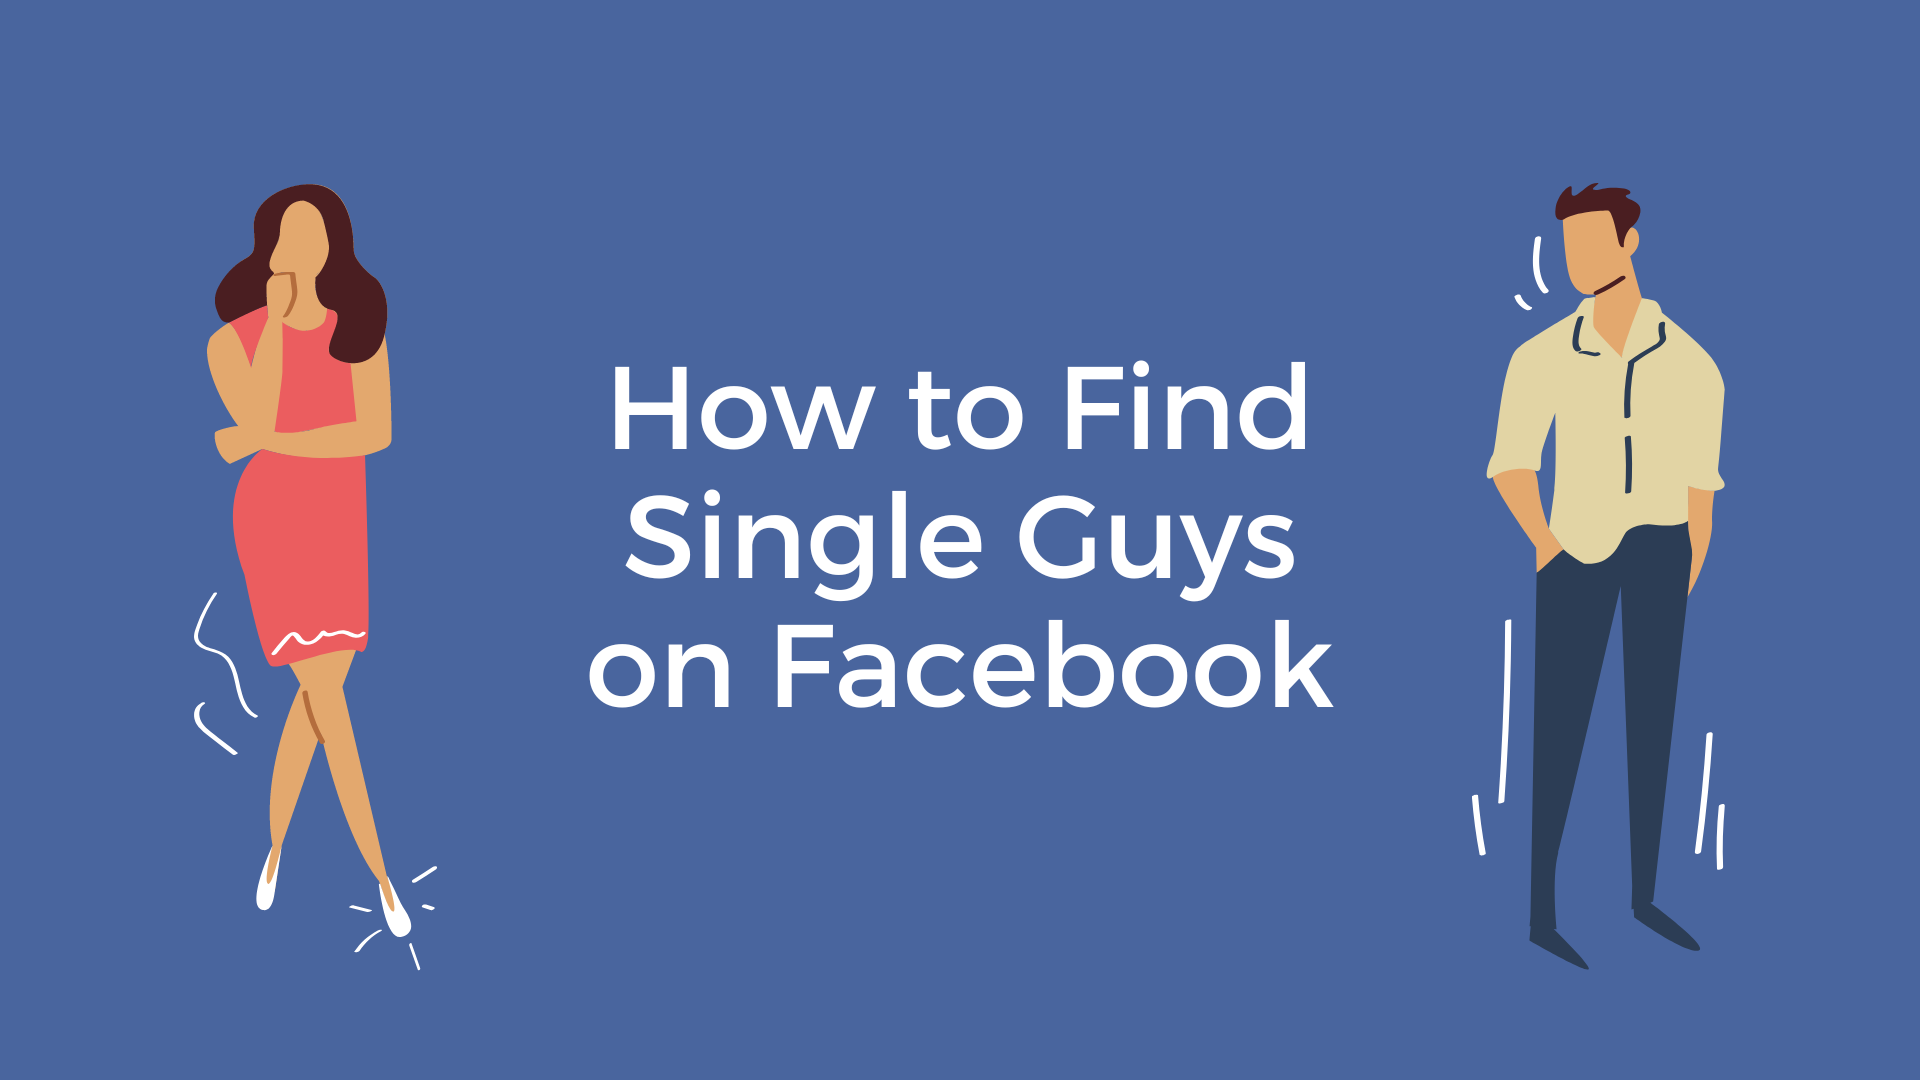 How to Find Single Guys on Facebook